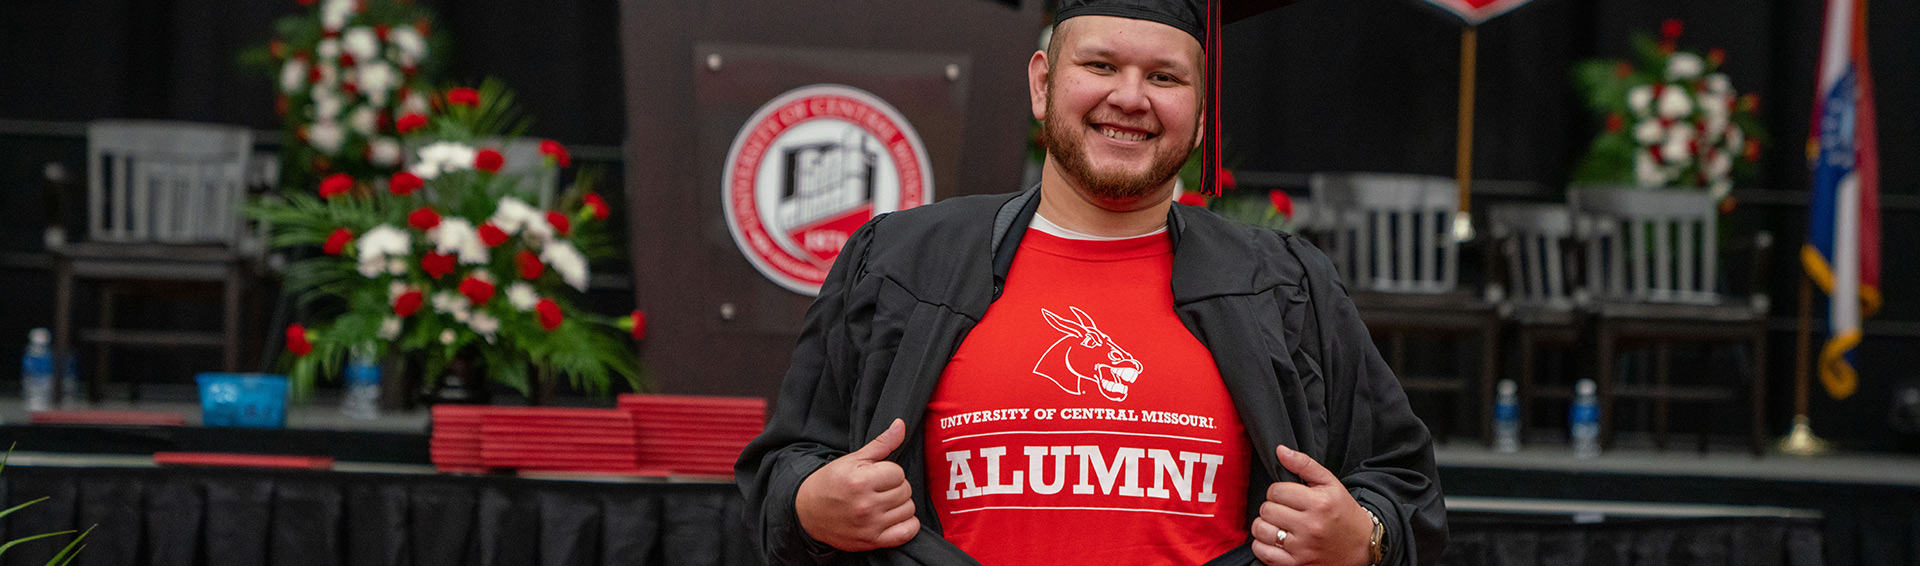 A UCM alum showing their alumni shirt at Commencement